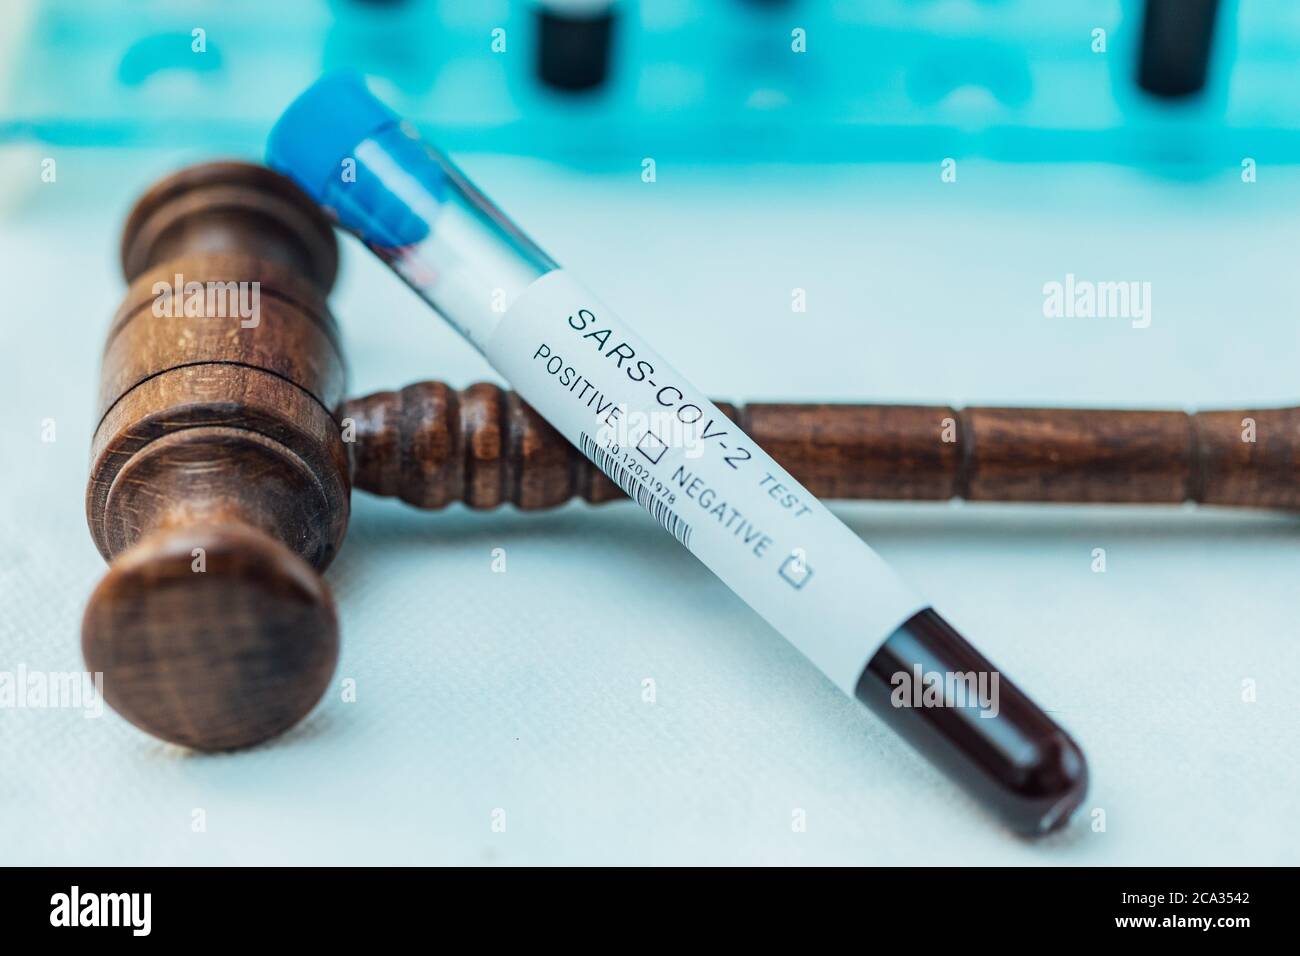 Test tube with blood to do COIVD test supported by judge's gavel. Stock Photo